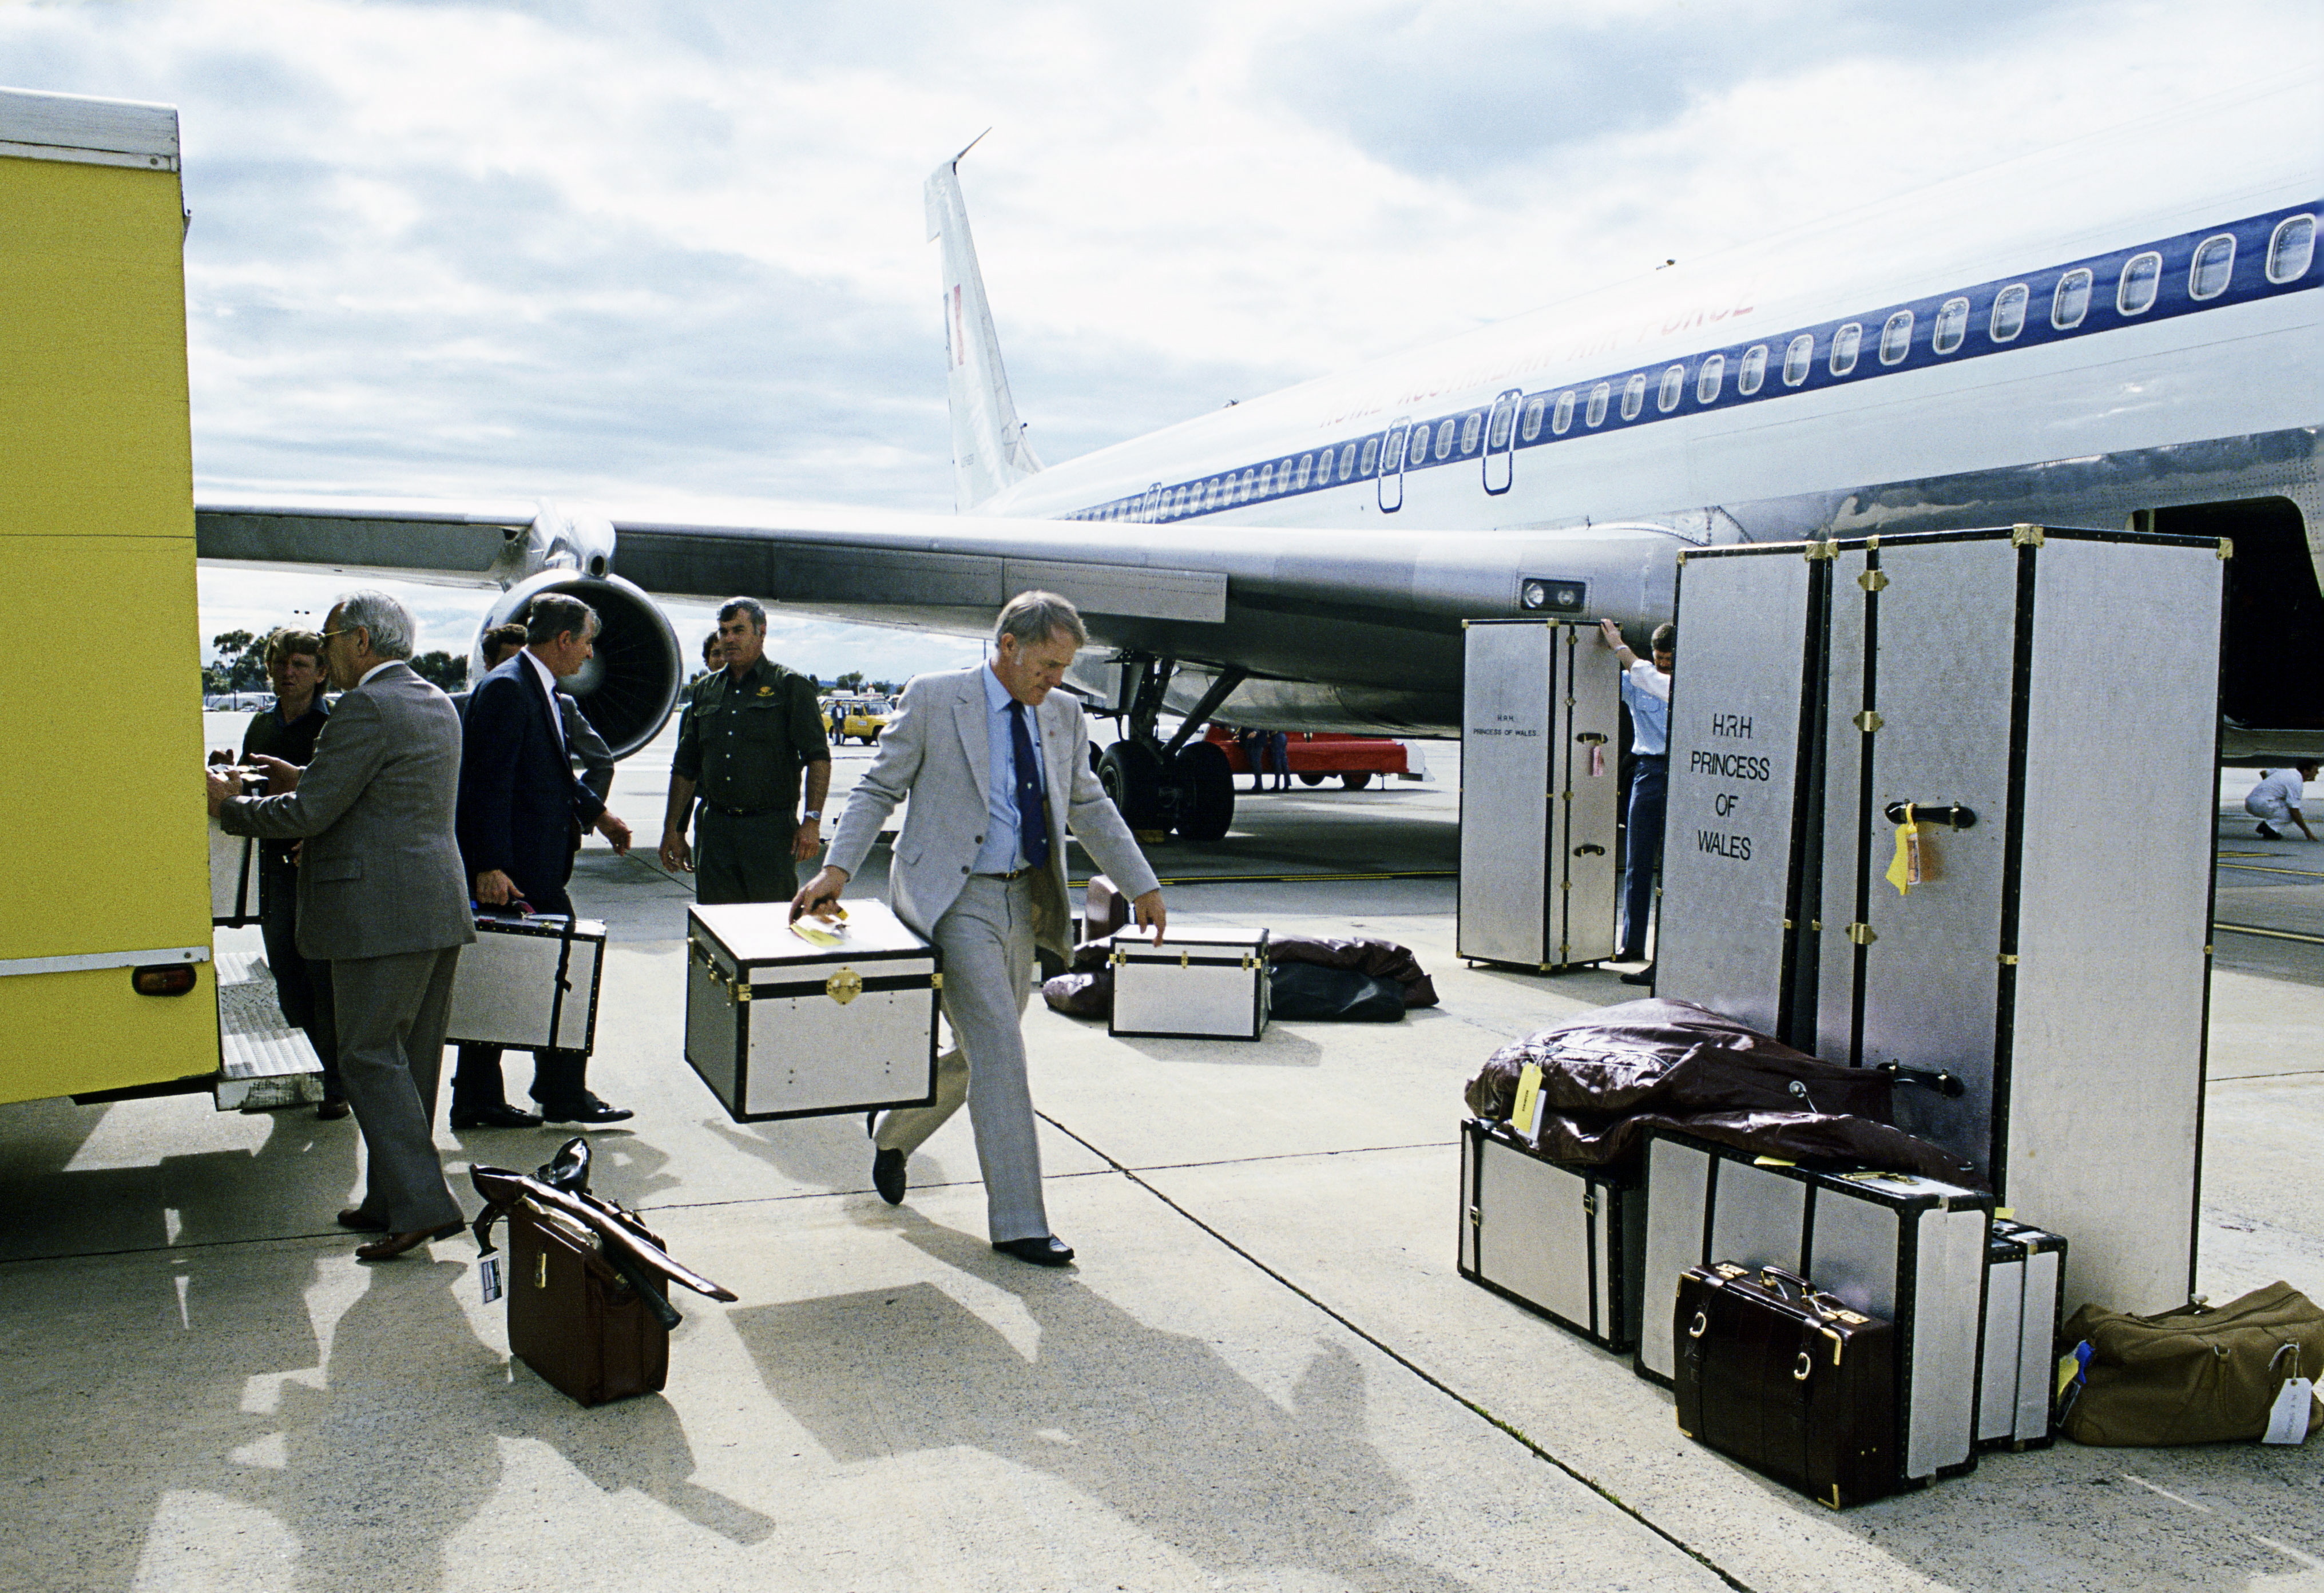 Luggage for Prince Charles being unloaded during a royal tour in Australia